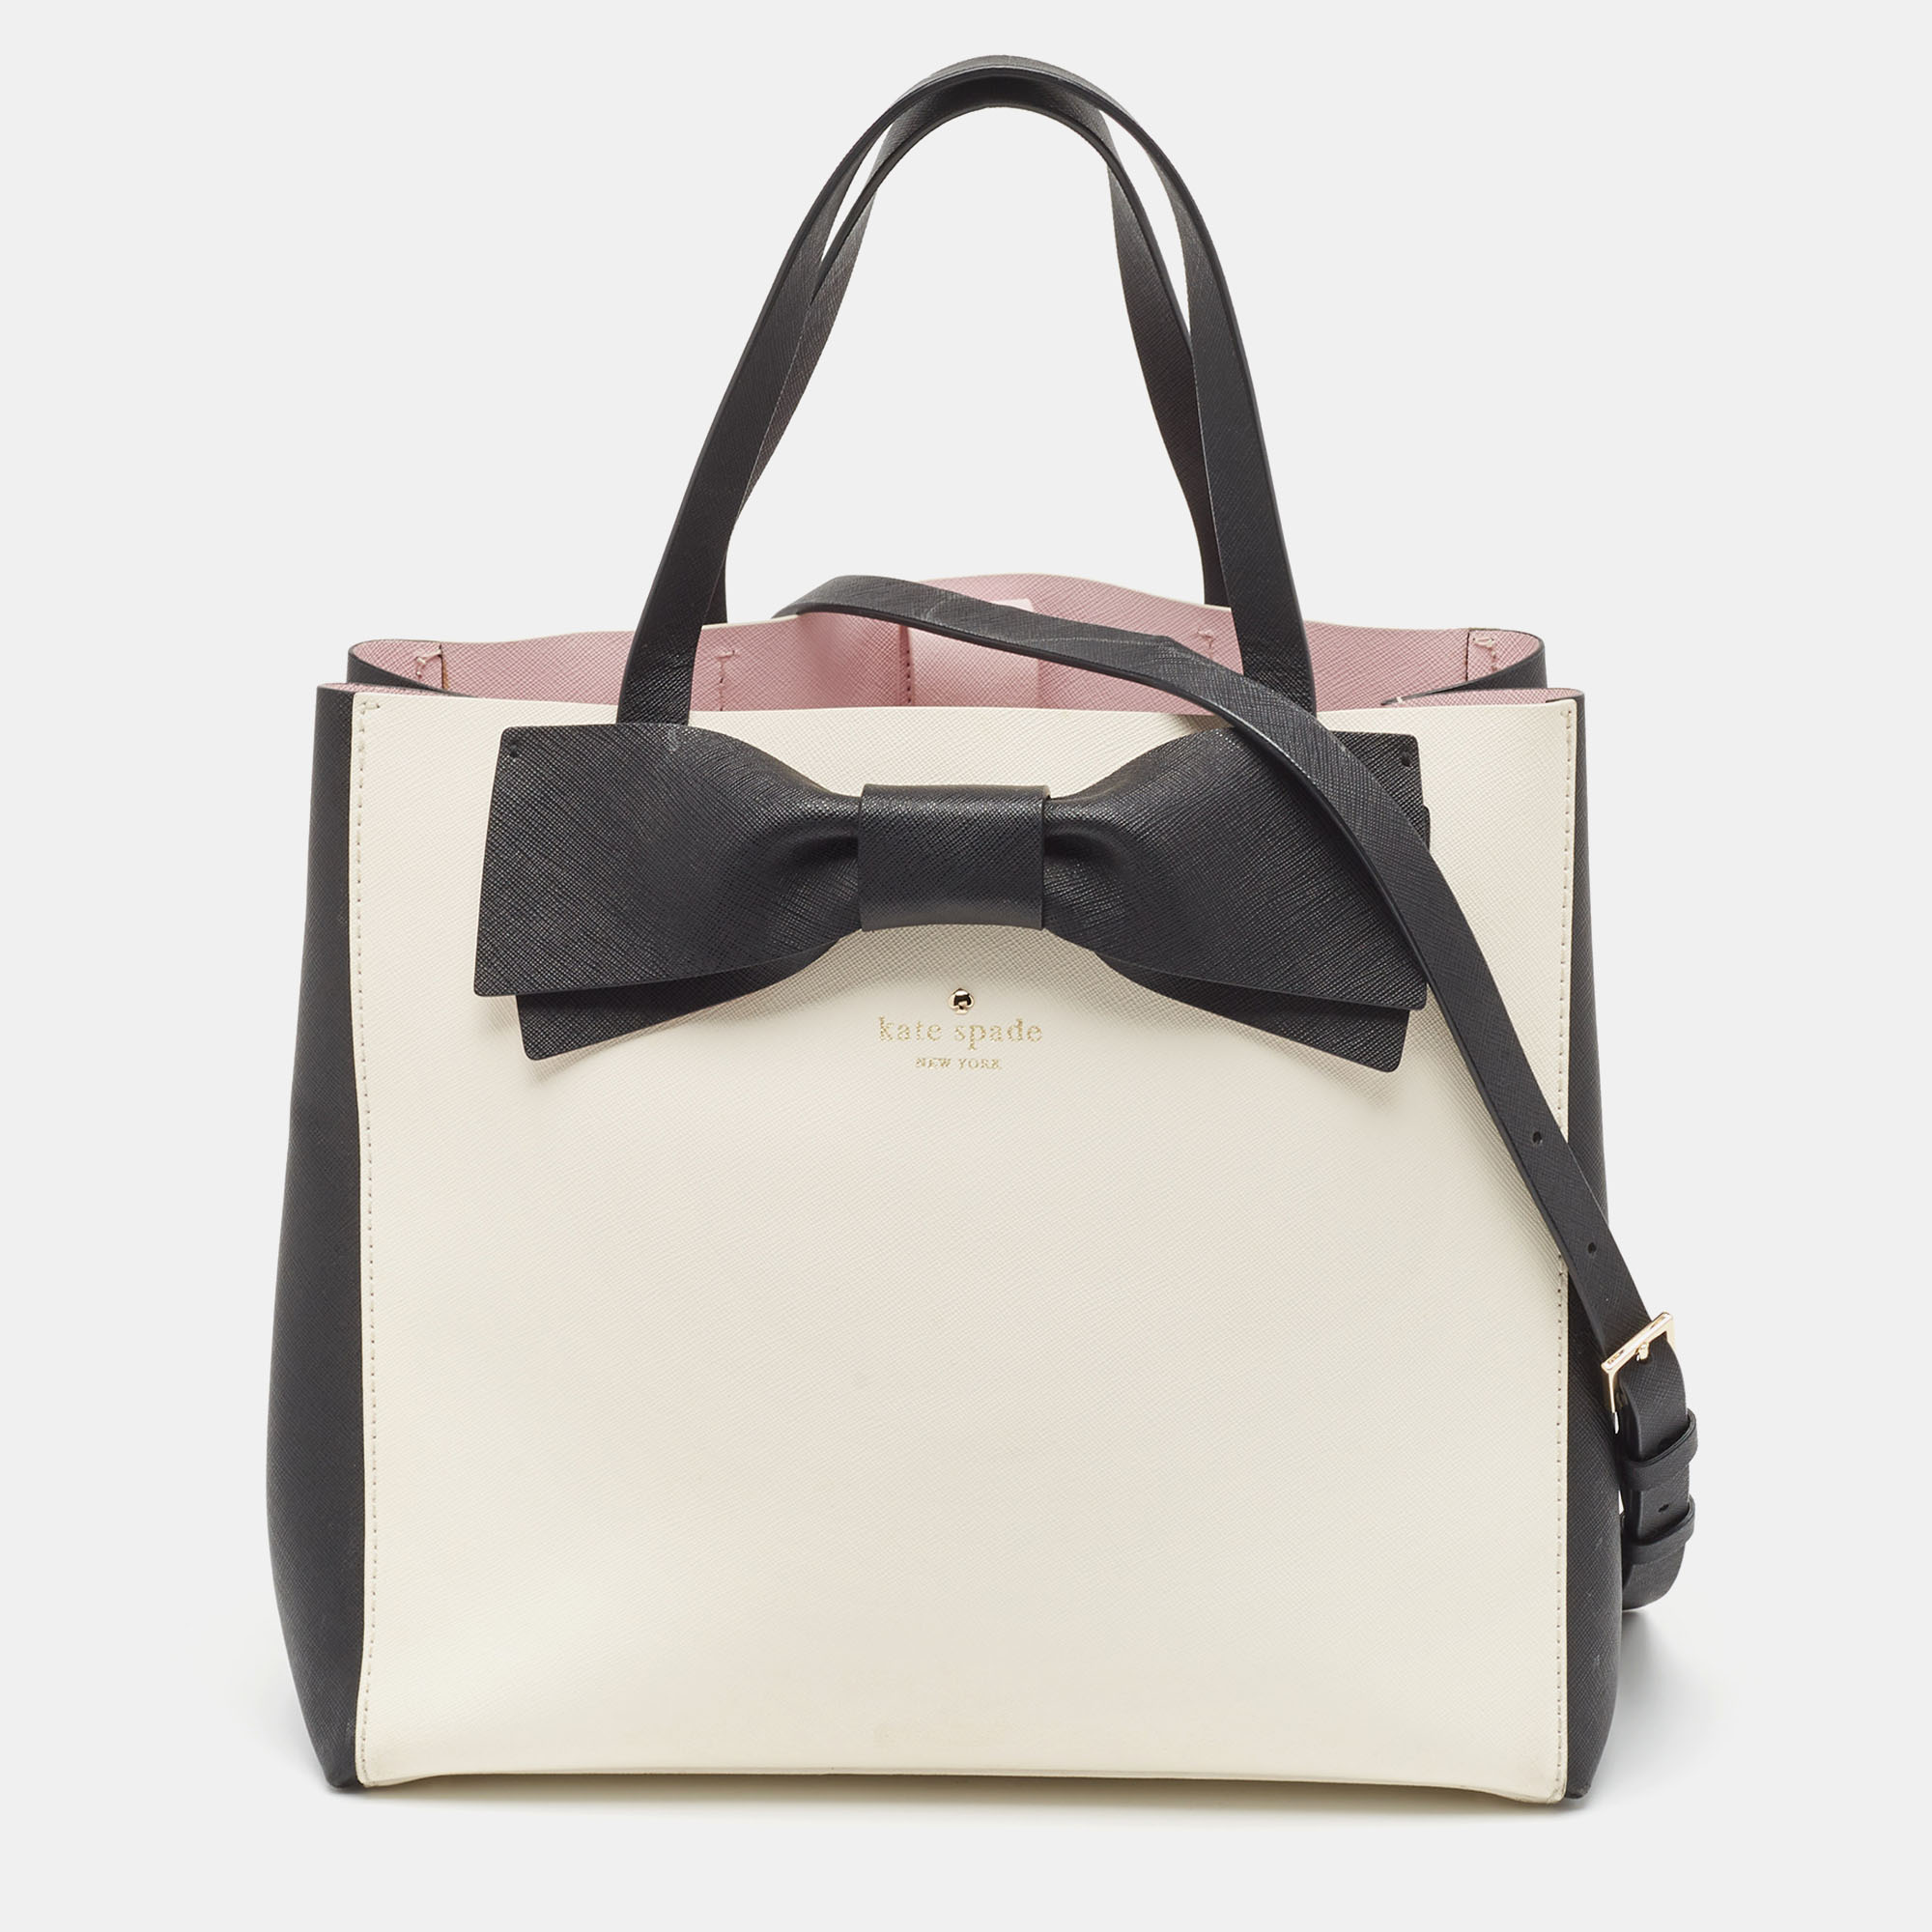 Pre-owned Kate Spade Black/white Leather Bow Tote